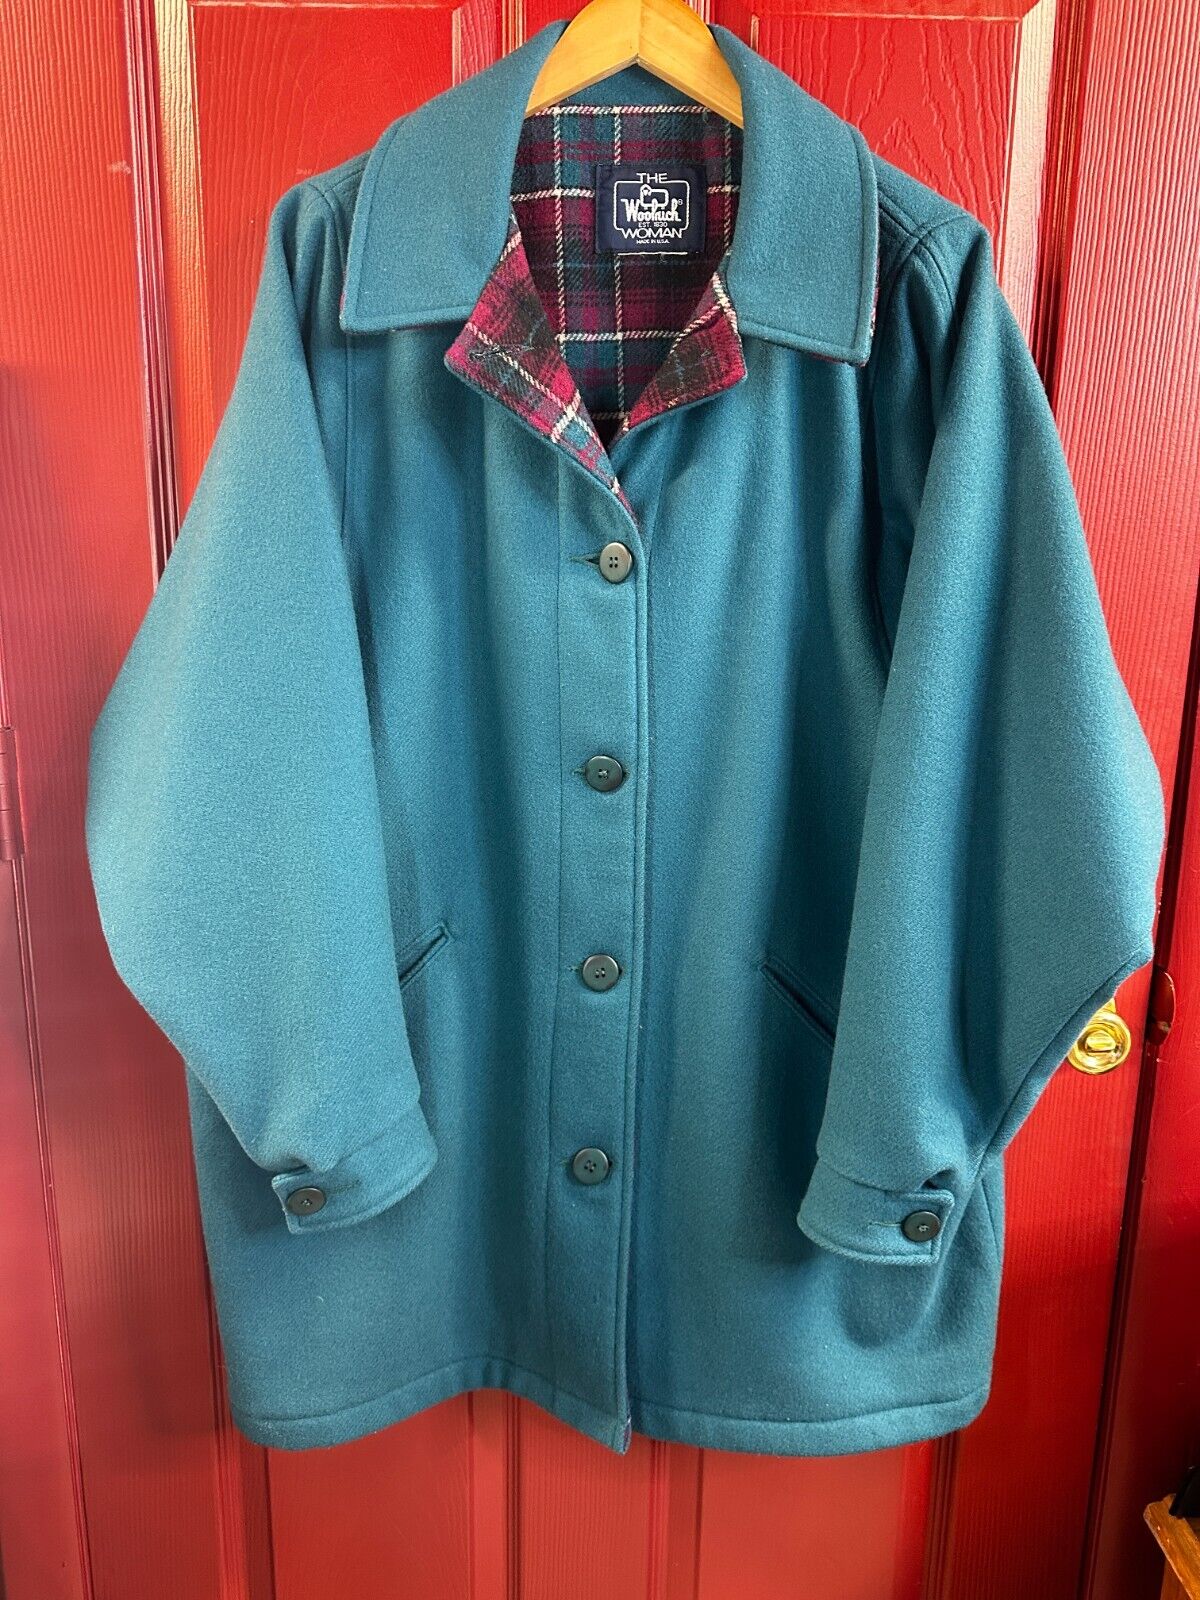 Vintage 1960s Woolrich Womens 100% Pure Wool Button Up Coat Jacket Teal Blue